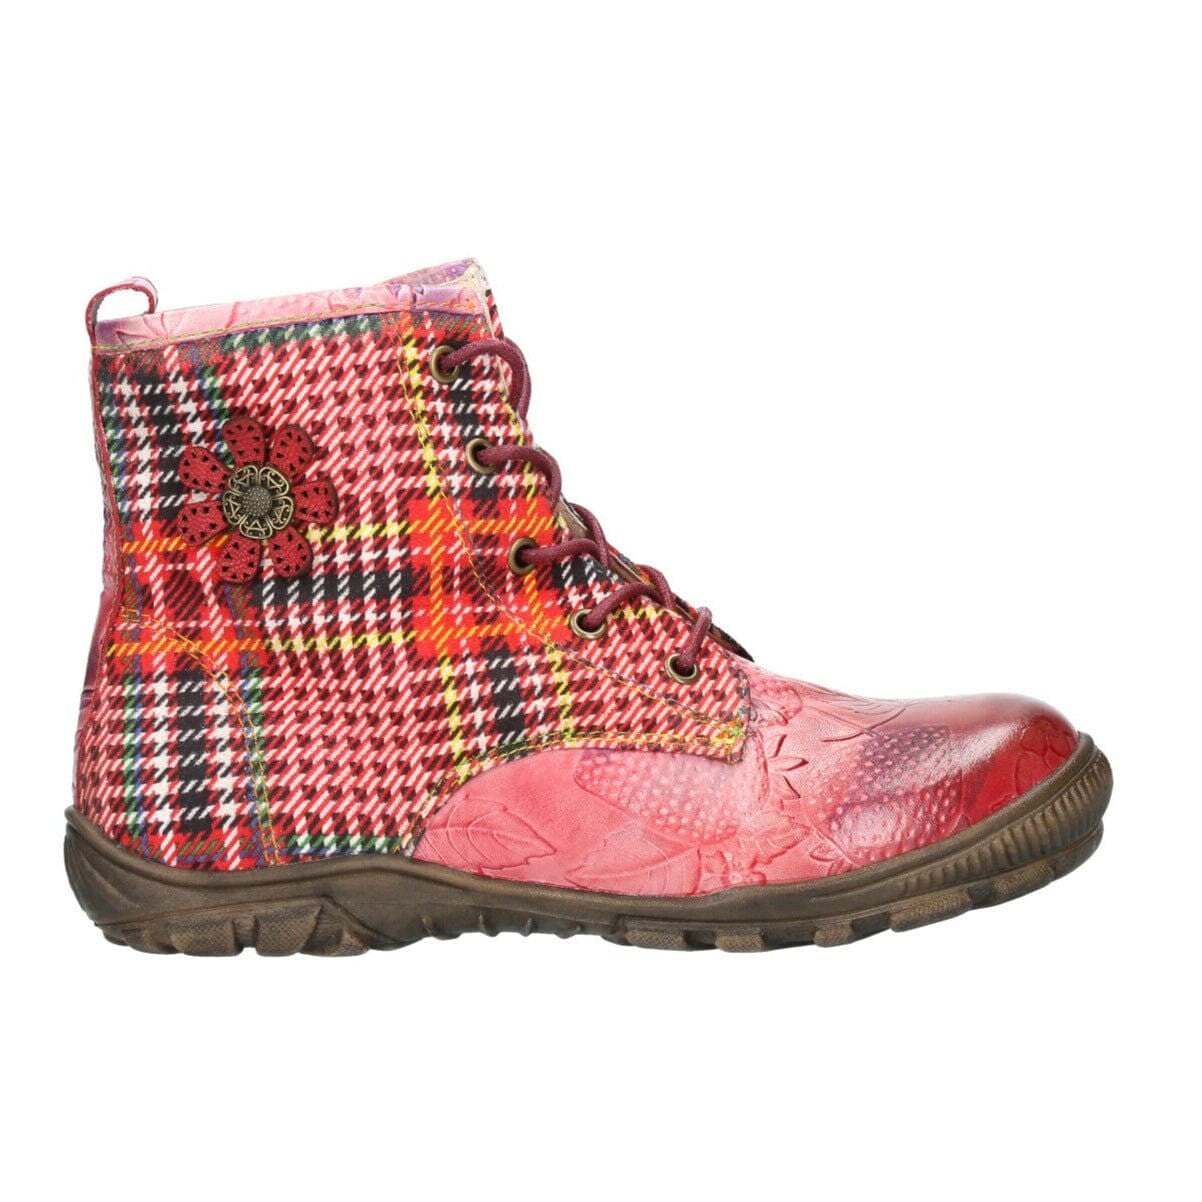 Kinderschuh IVCRIAO 01 - Rot / 30 - Boots